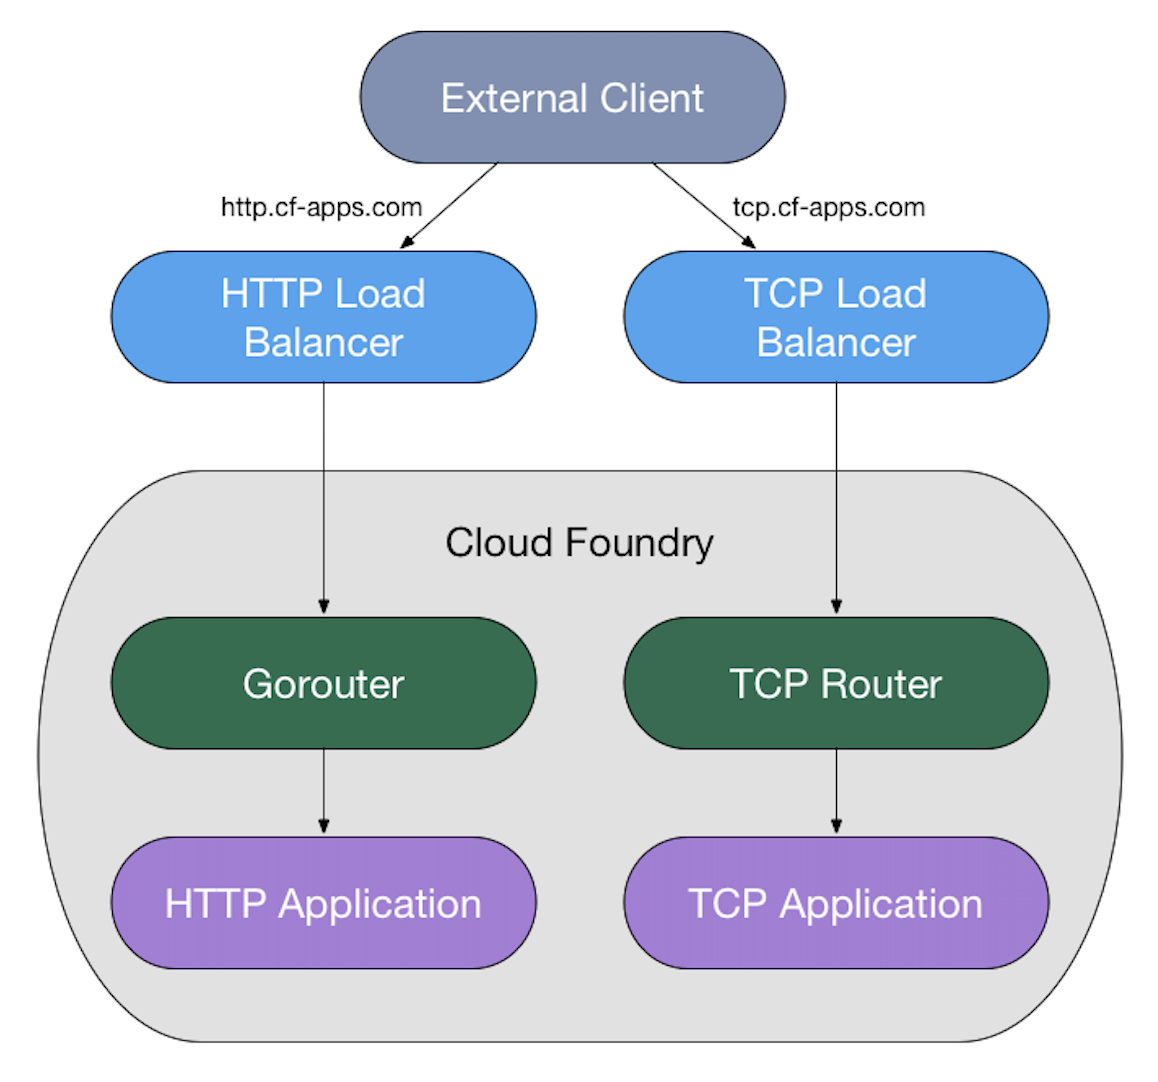 External client request flow. The External Client sends out two data flows, one to the HTTP Load Balancer (http.cf-apps.com) and one to the TCP Load Balancer (tcp.cf-apps.com). HTTP Load Balancer sends data through Gorouter to the HTTP Application. TCP Load Balancer sends data through TCP Router to the TCP Application. Gorouter, TCP Router, HTTP Application, and TCP Application are co-located in in a box labelled Cloud Foundry.